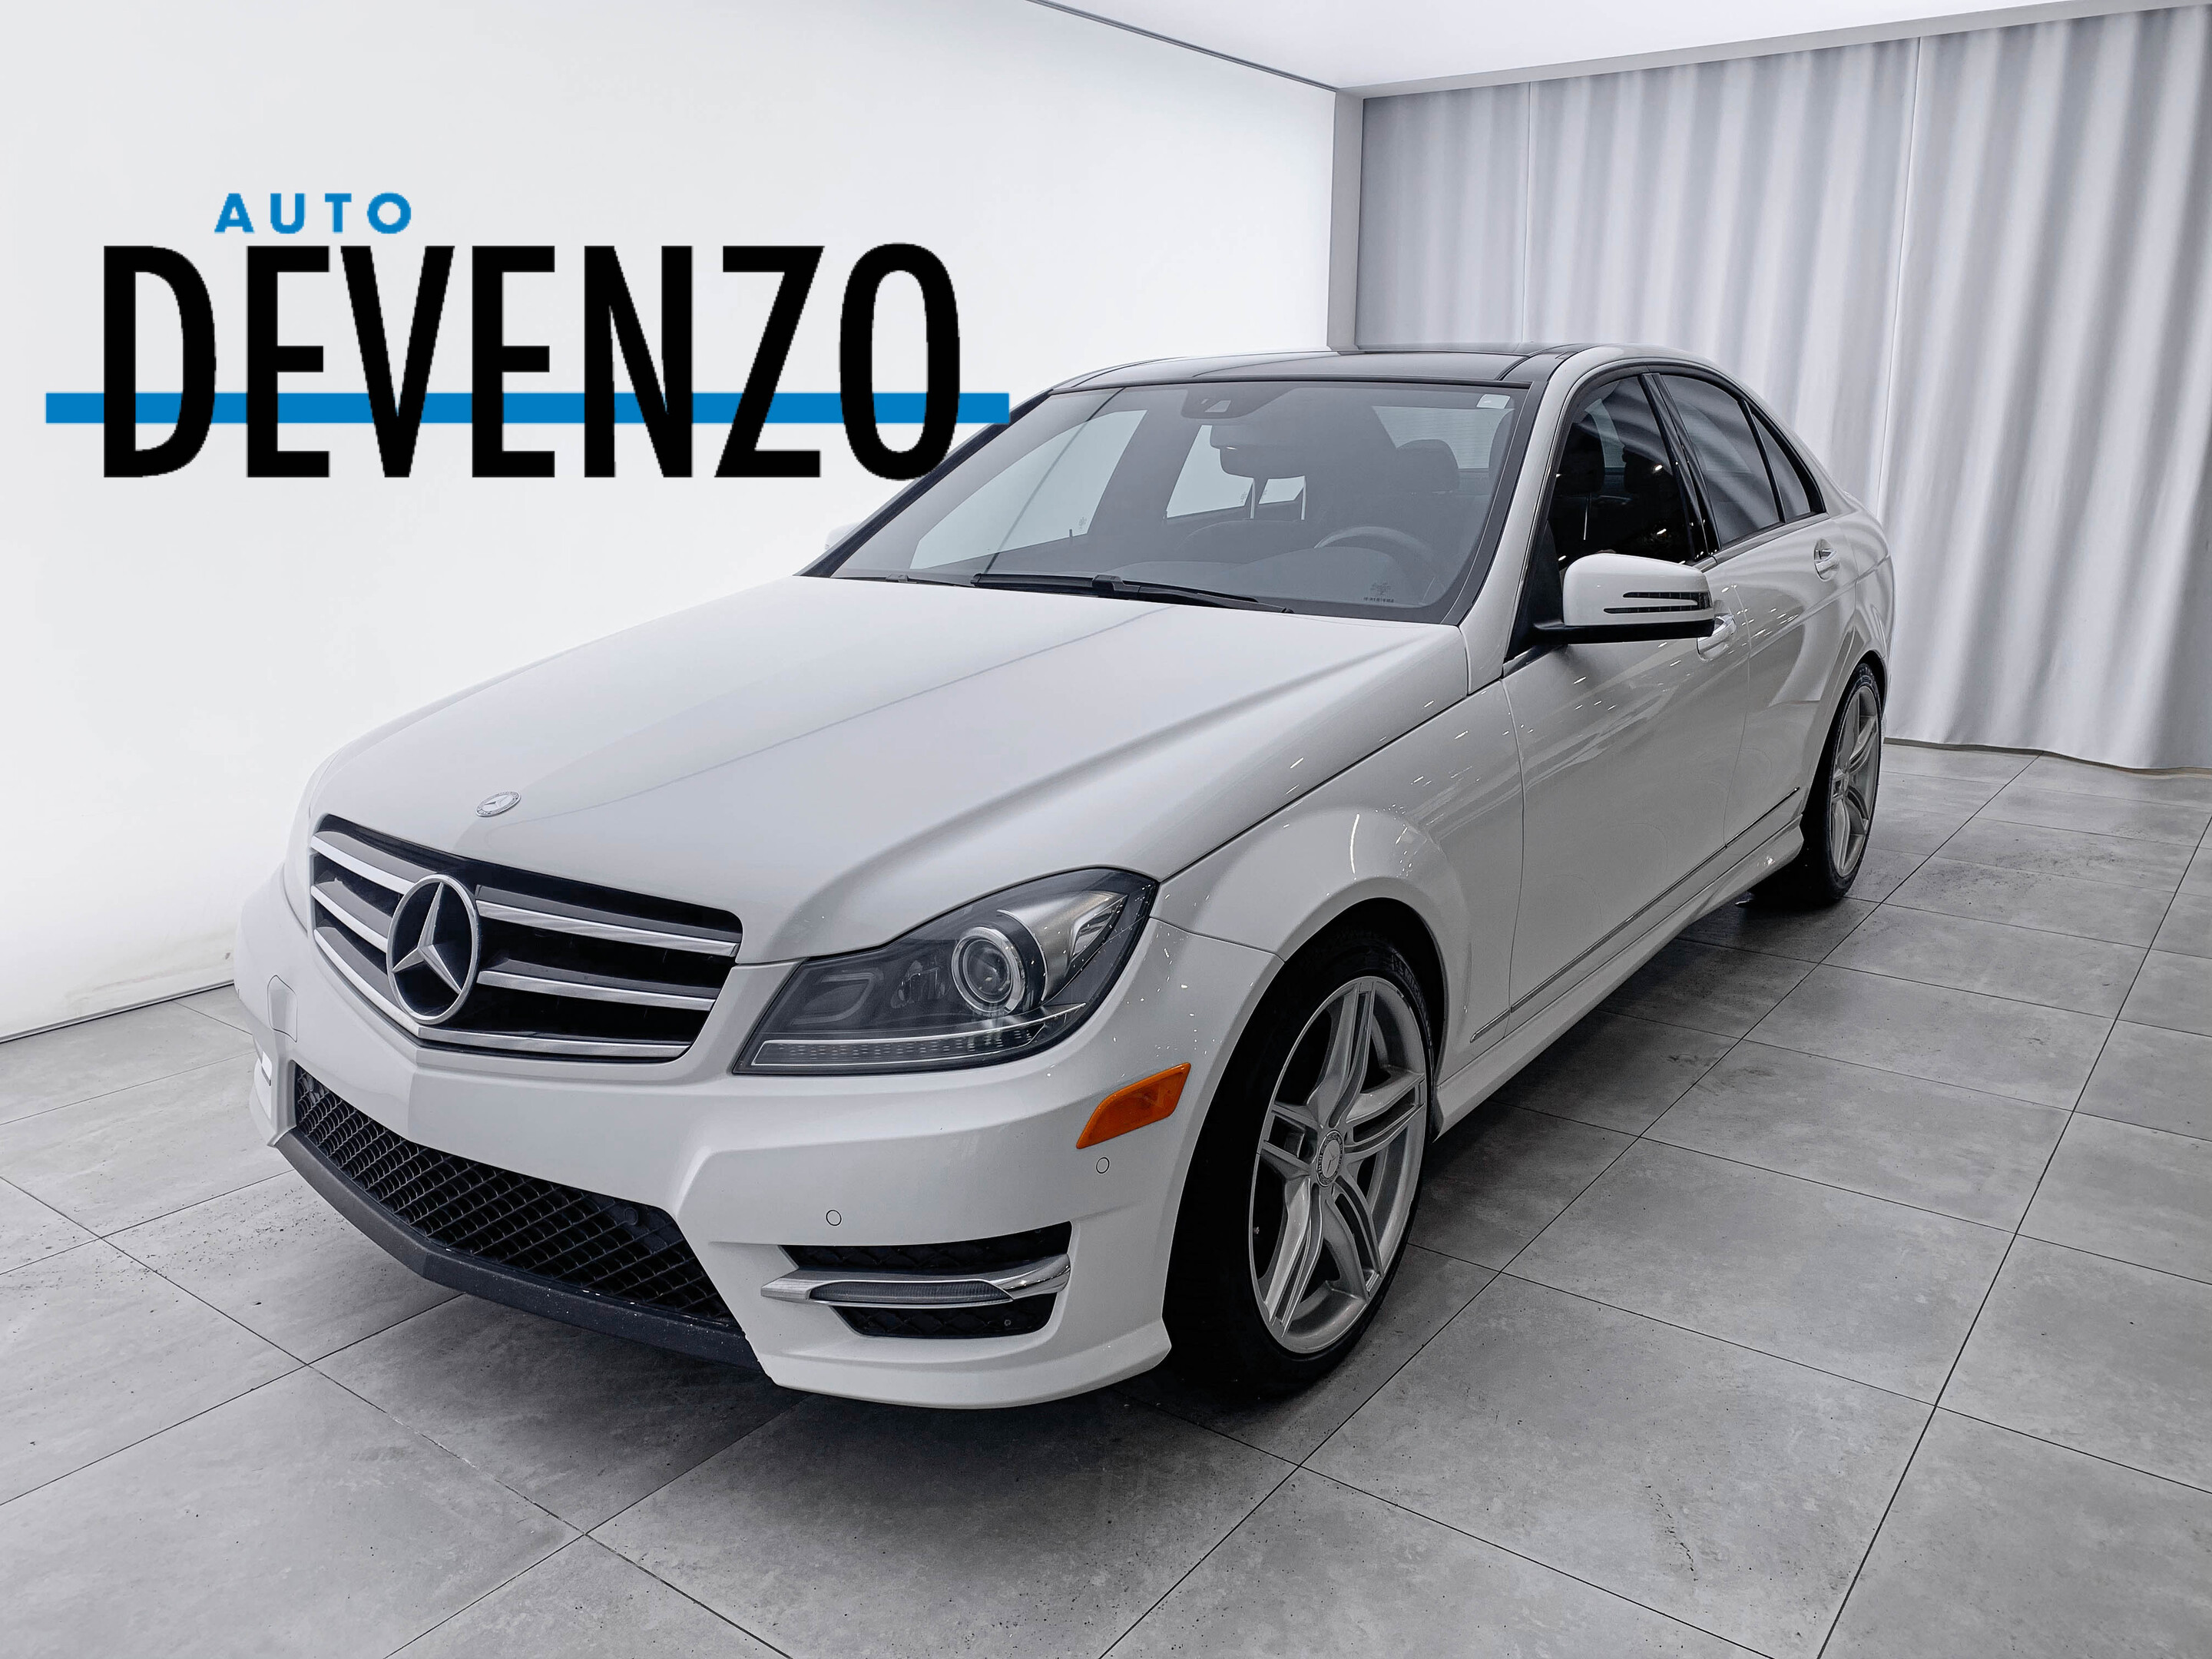 2014 Mercedes-Benz C-Class C350 4MATIC AMG SPORT PACKAGE V6 302HP complet